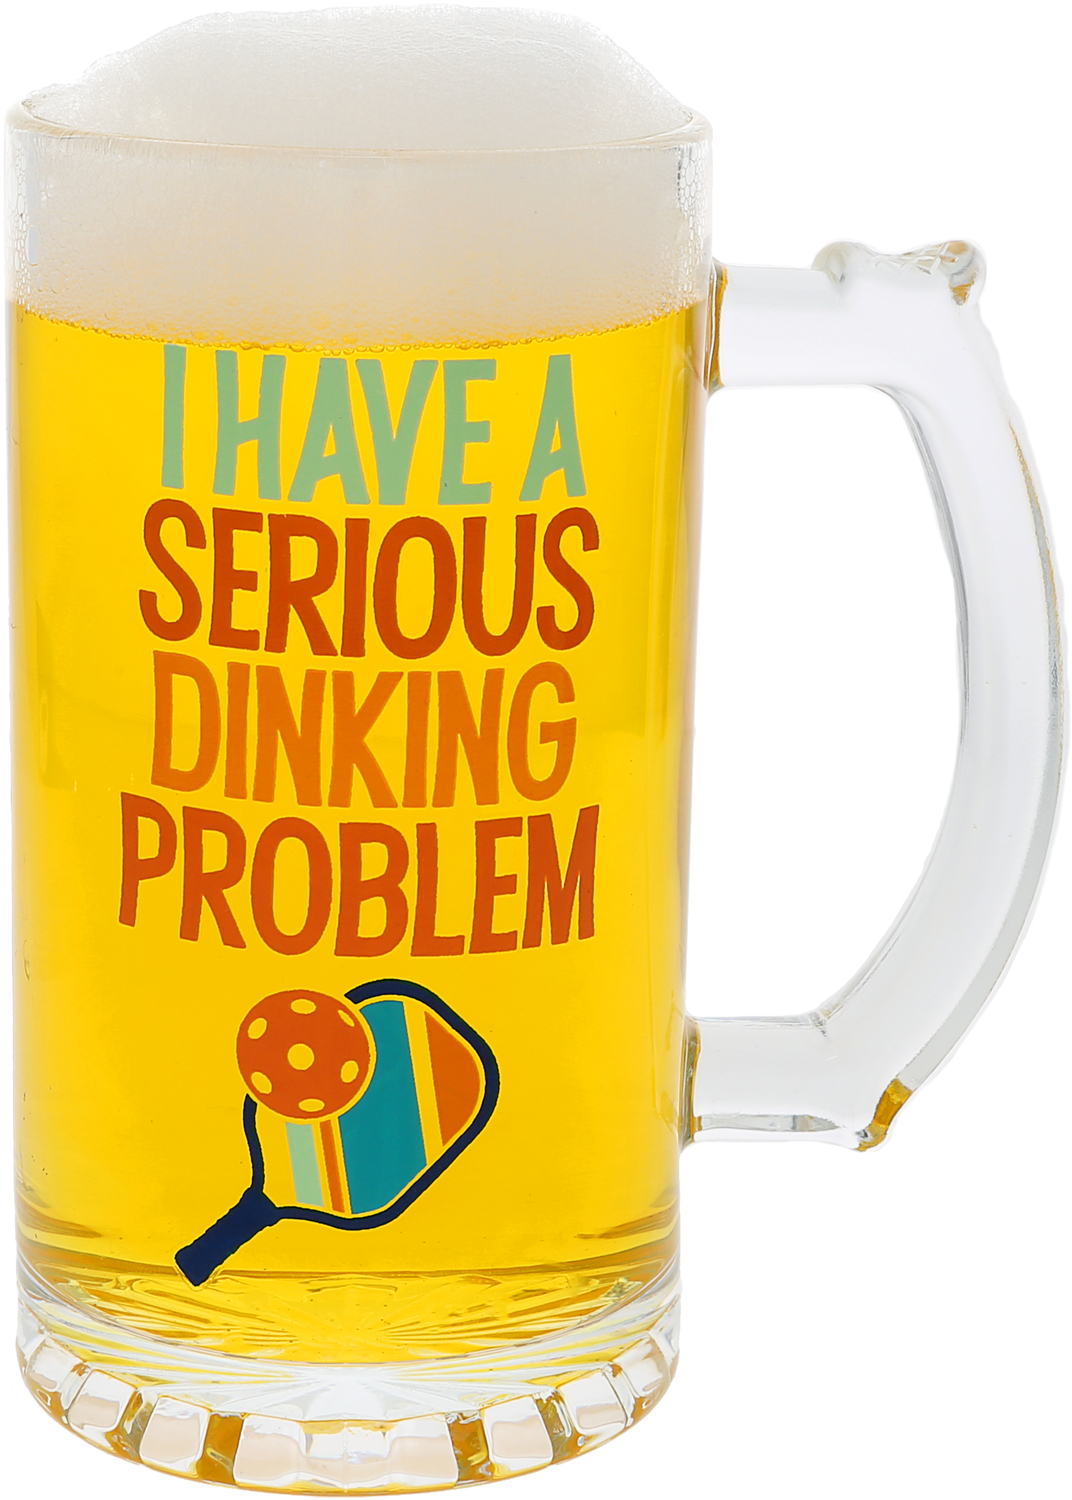 Dinking Problem by Positively Pickled - MHS - Dinking Problem - 16 oz Glass Stein